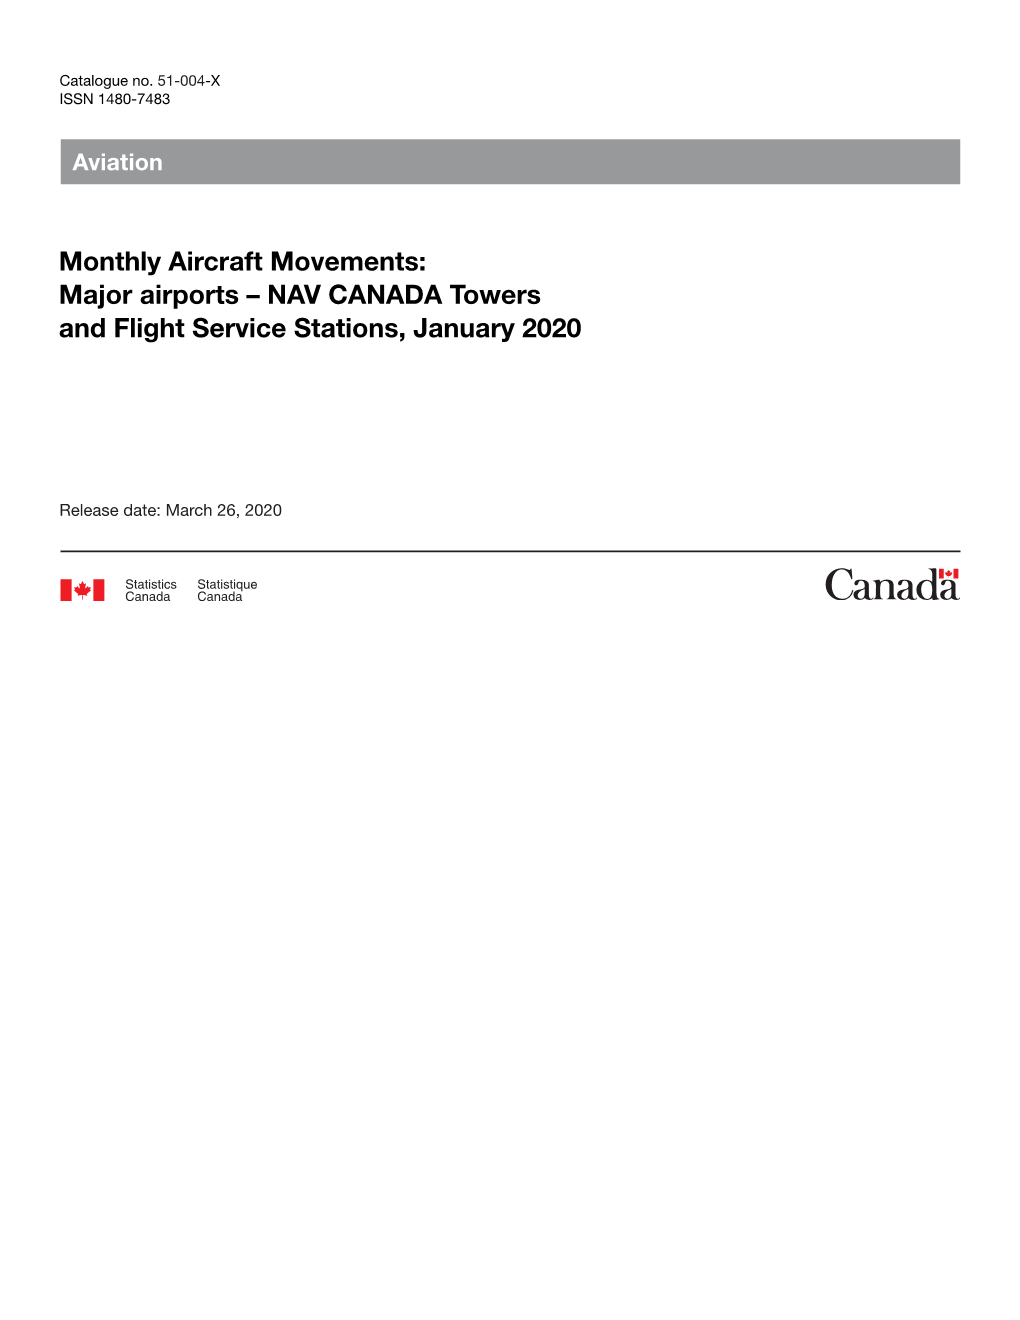 Monthly Aircraft Movements: Major Airports – NAV CANADA Towers and Flight Service Stations, January 2020